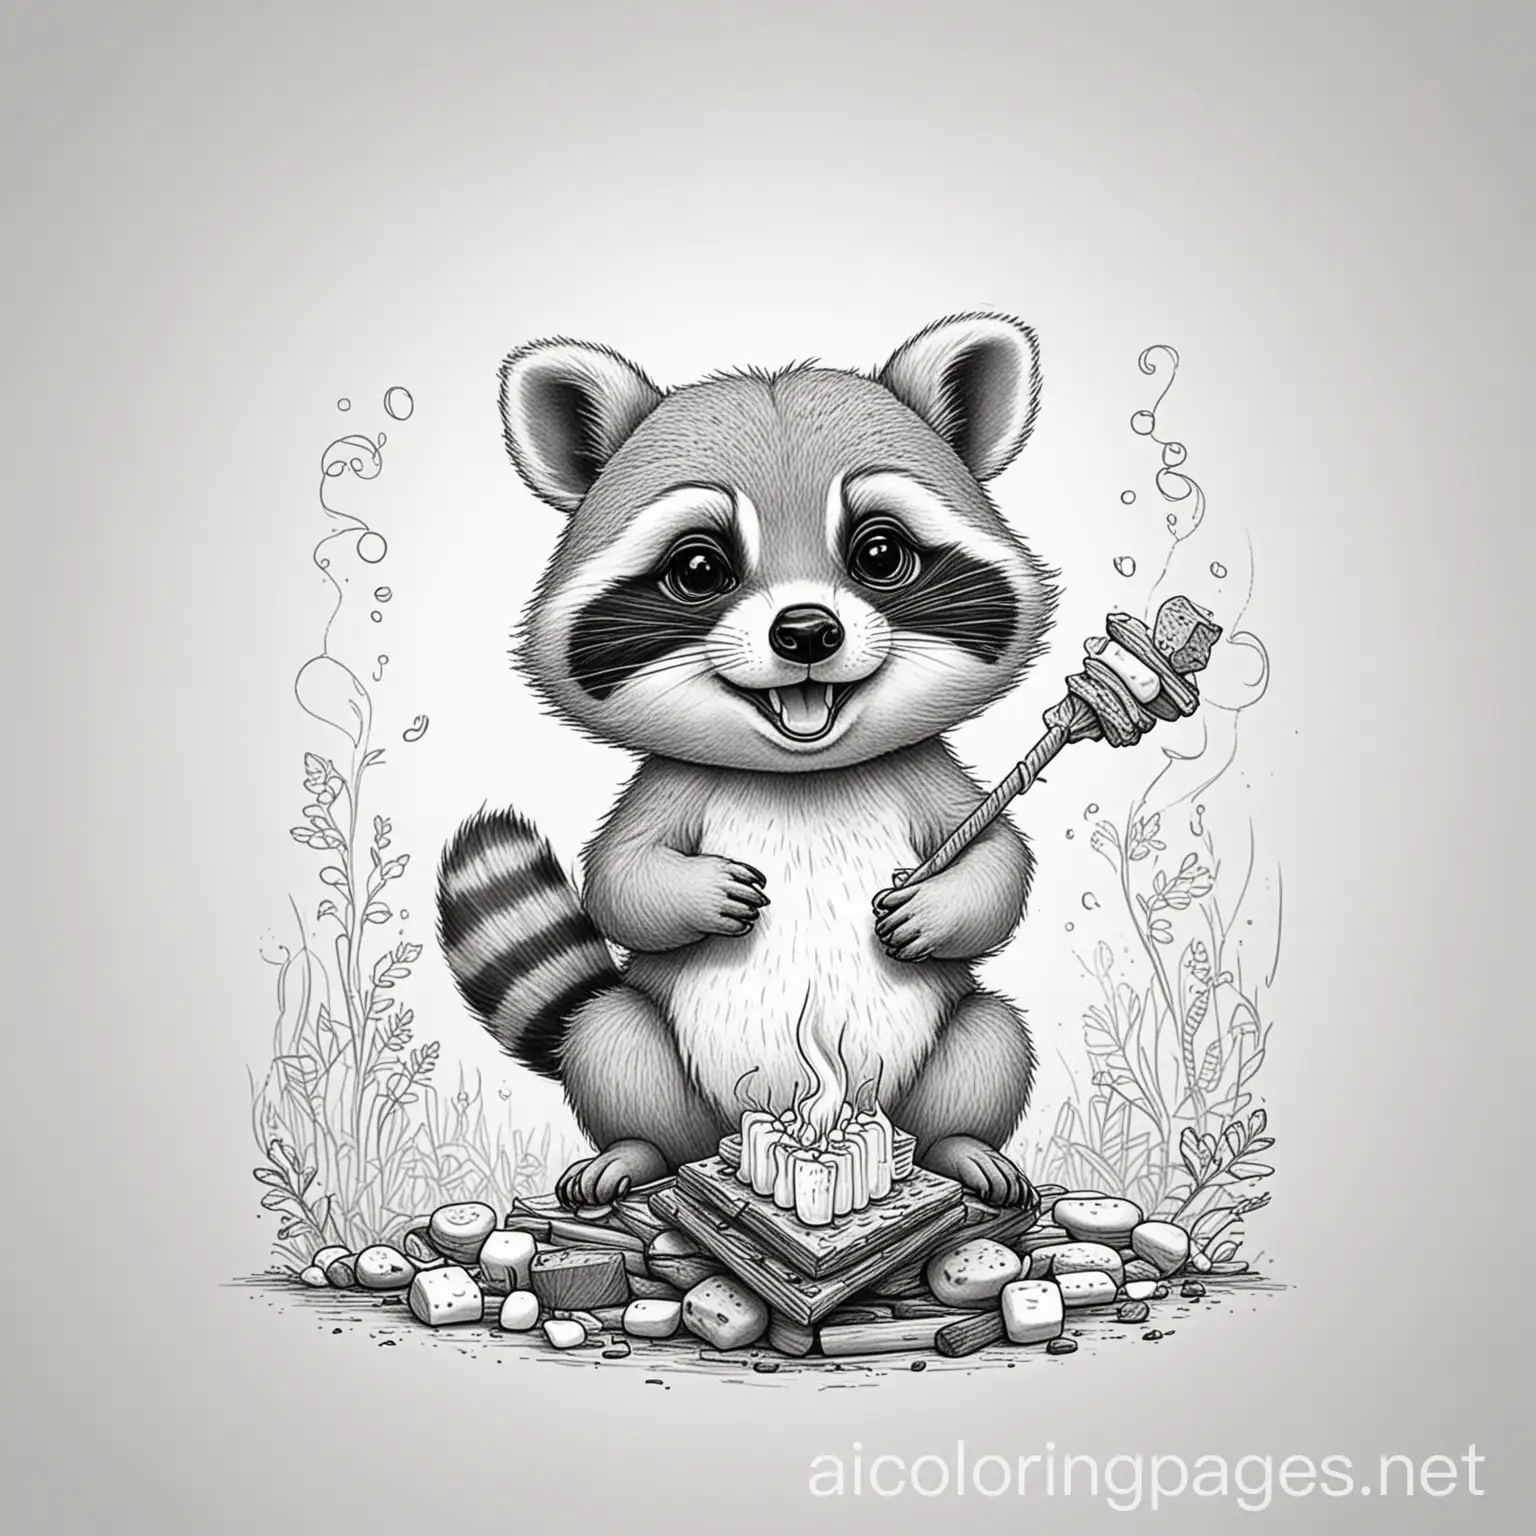 Cheerful-Raccoon-Making-Smores-Printable-Coloring-Page-for-Relaxation